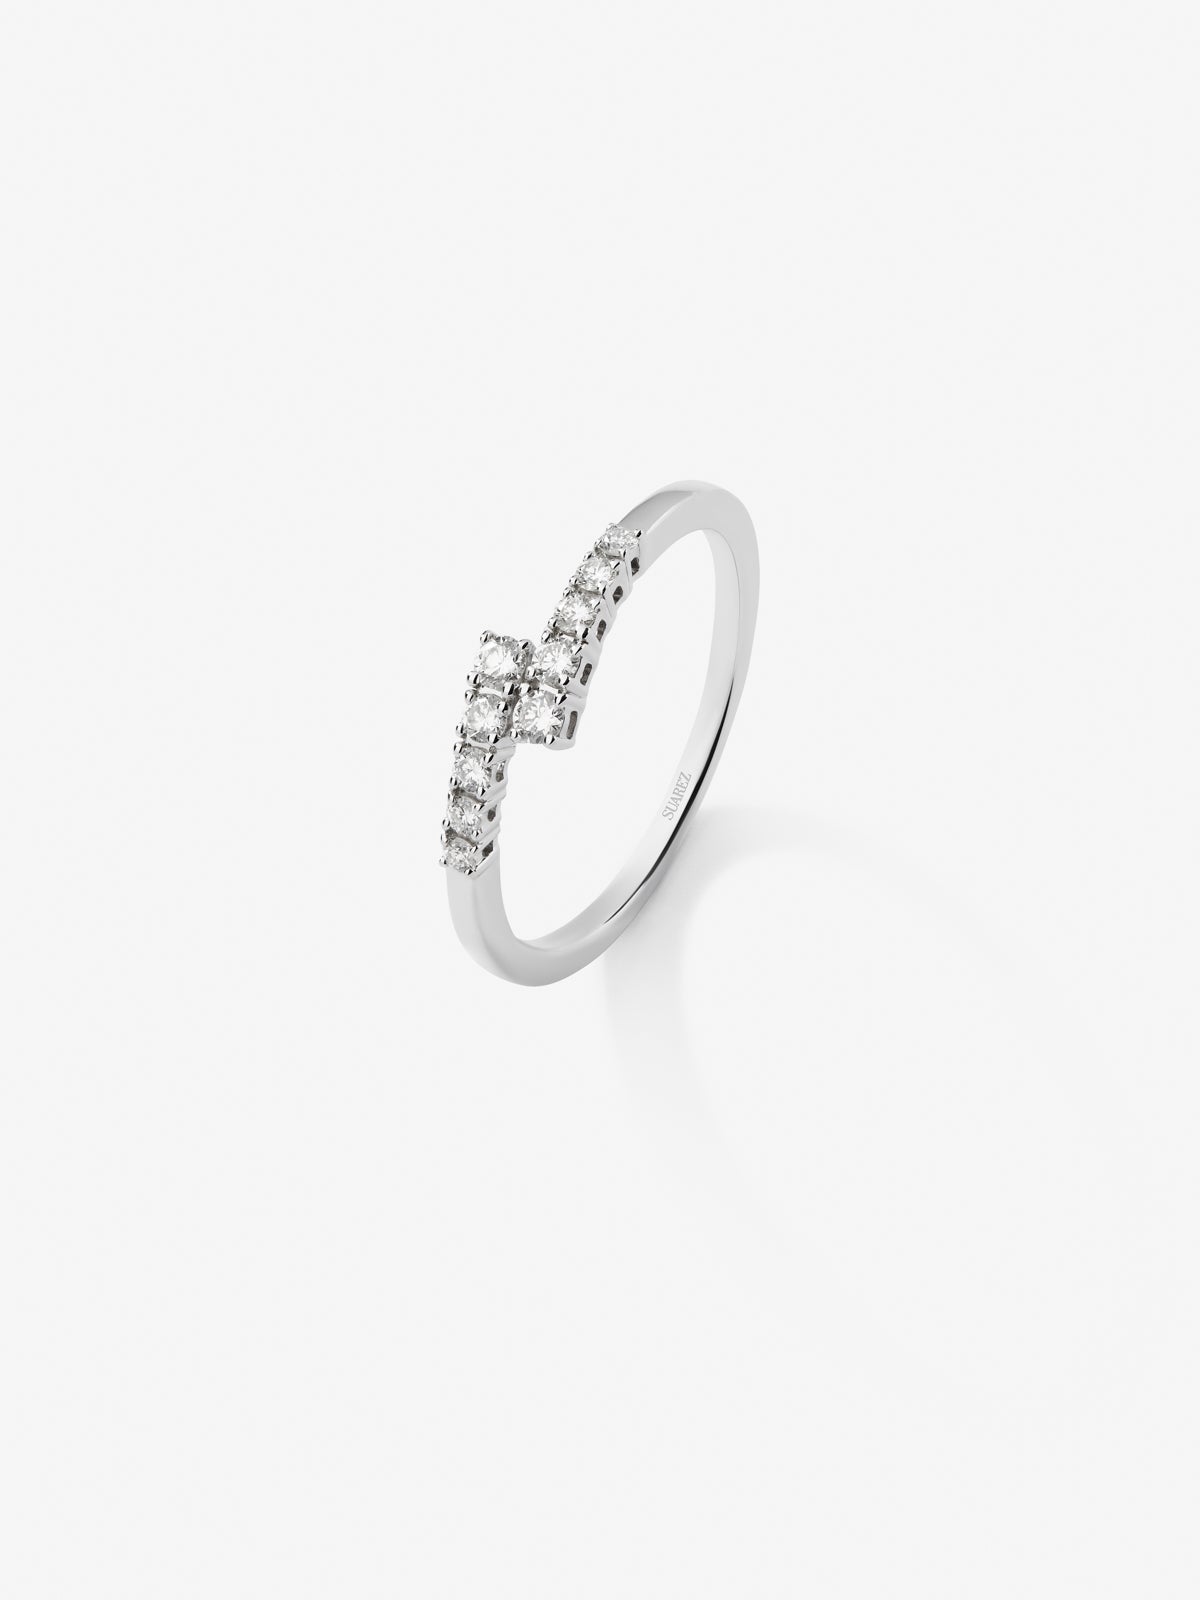 You and me ring in 18K white gold with 10 brilliant-cut diamonds with a total of 0.2 cts